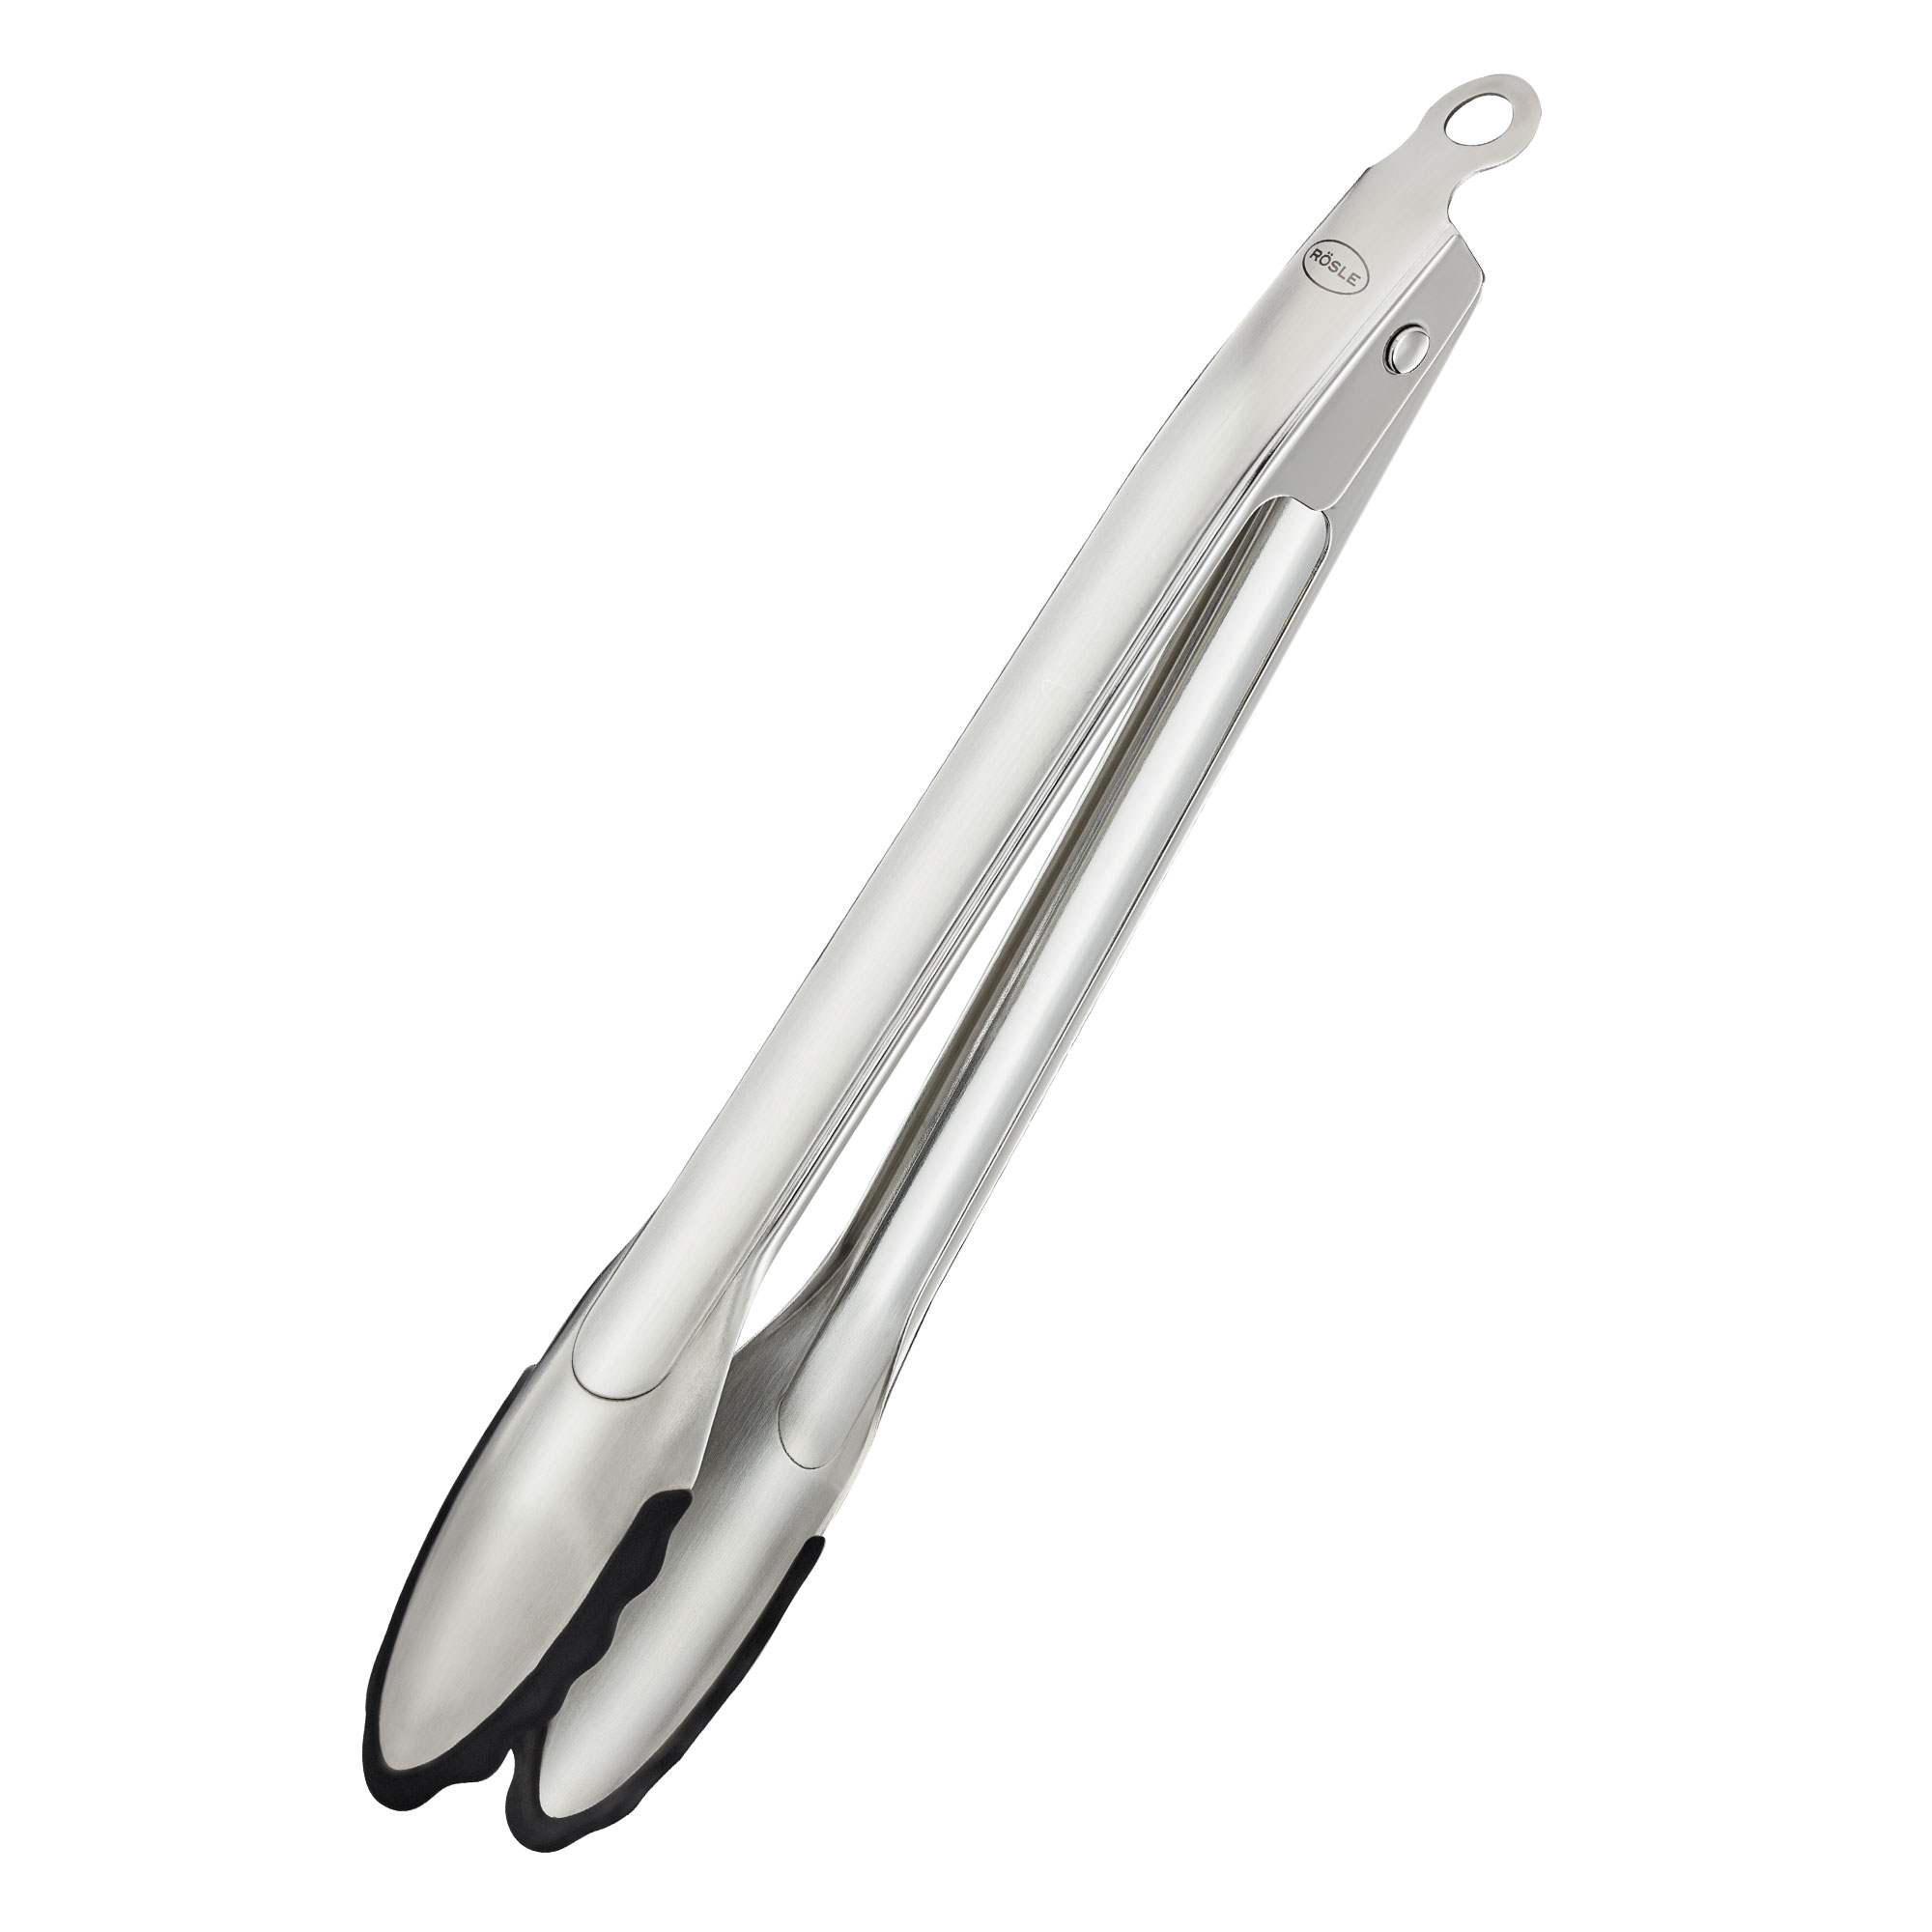 Buy Locking Tongs silicone 30 cm11.8 in. - online at RÖSLE GmbH & Co. KG